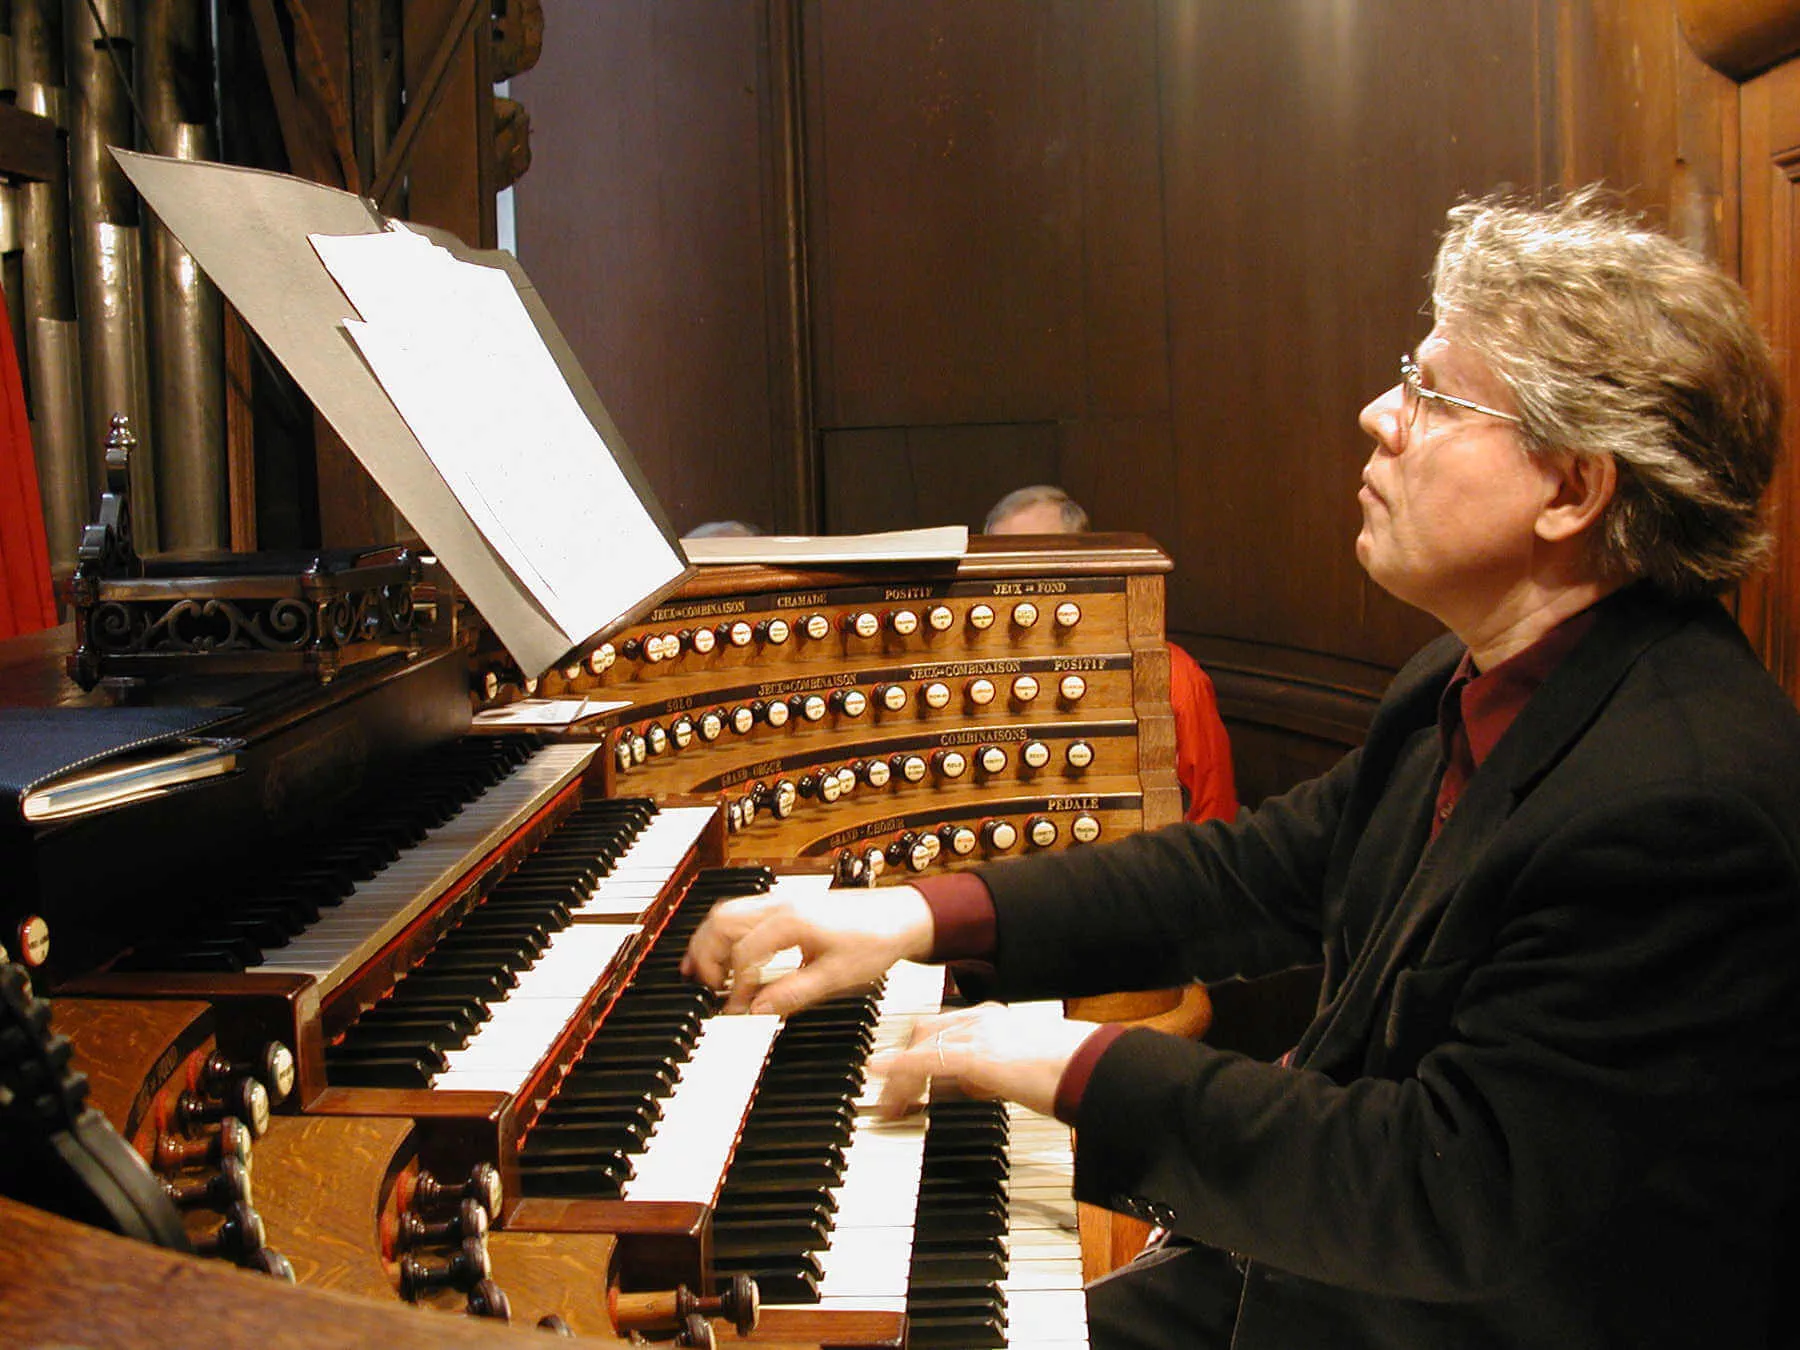 Daniel Roth welcomes guests at the grand pipe organ of St. Sulpice in Paris